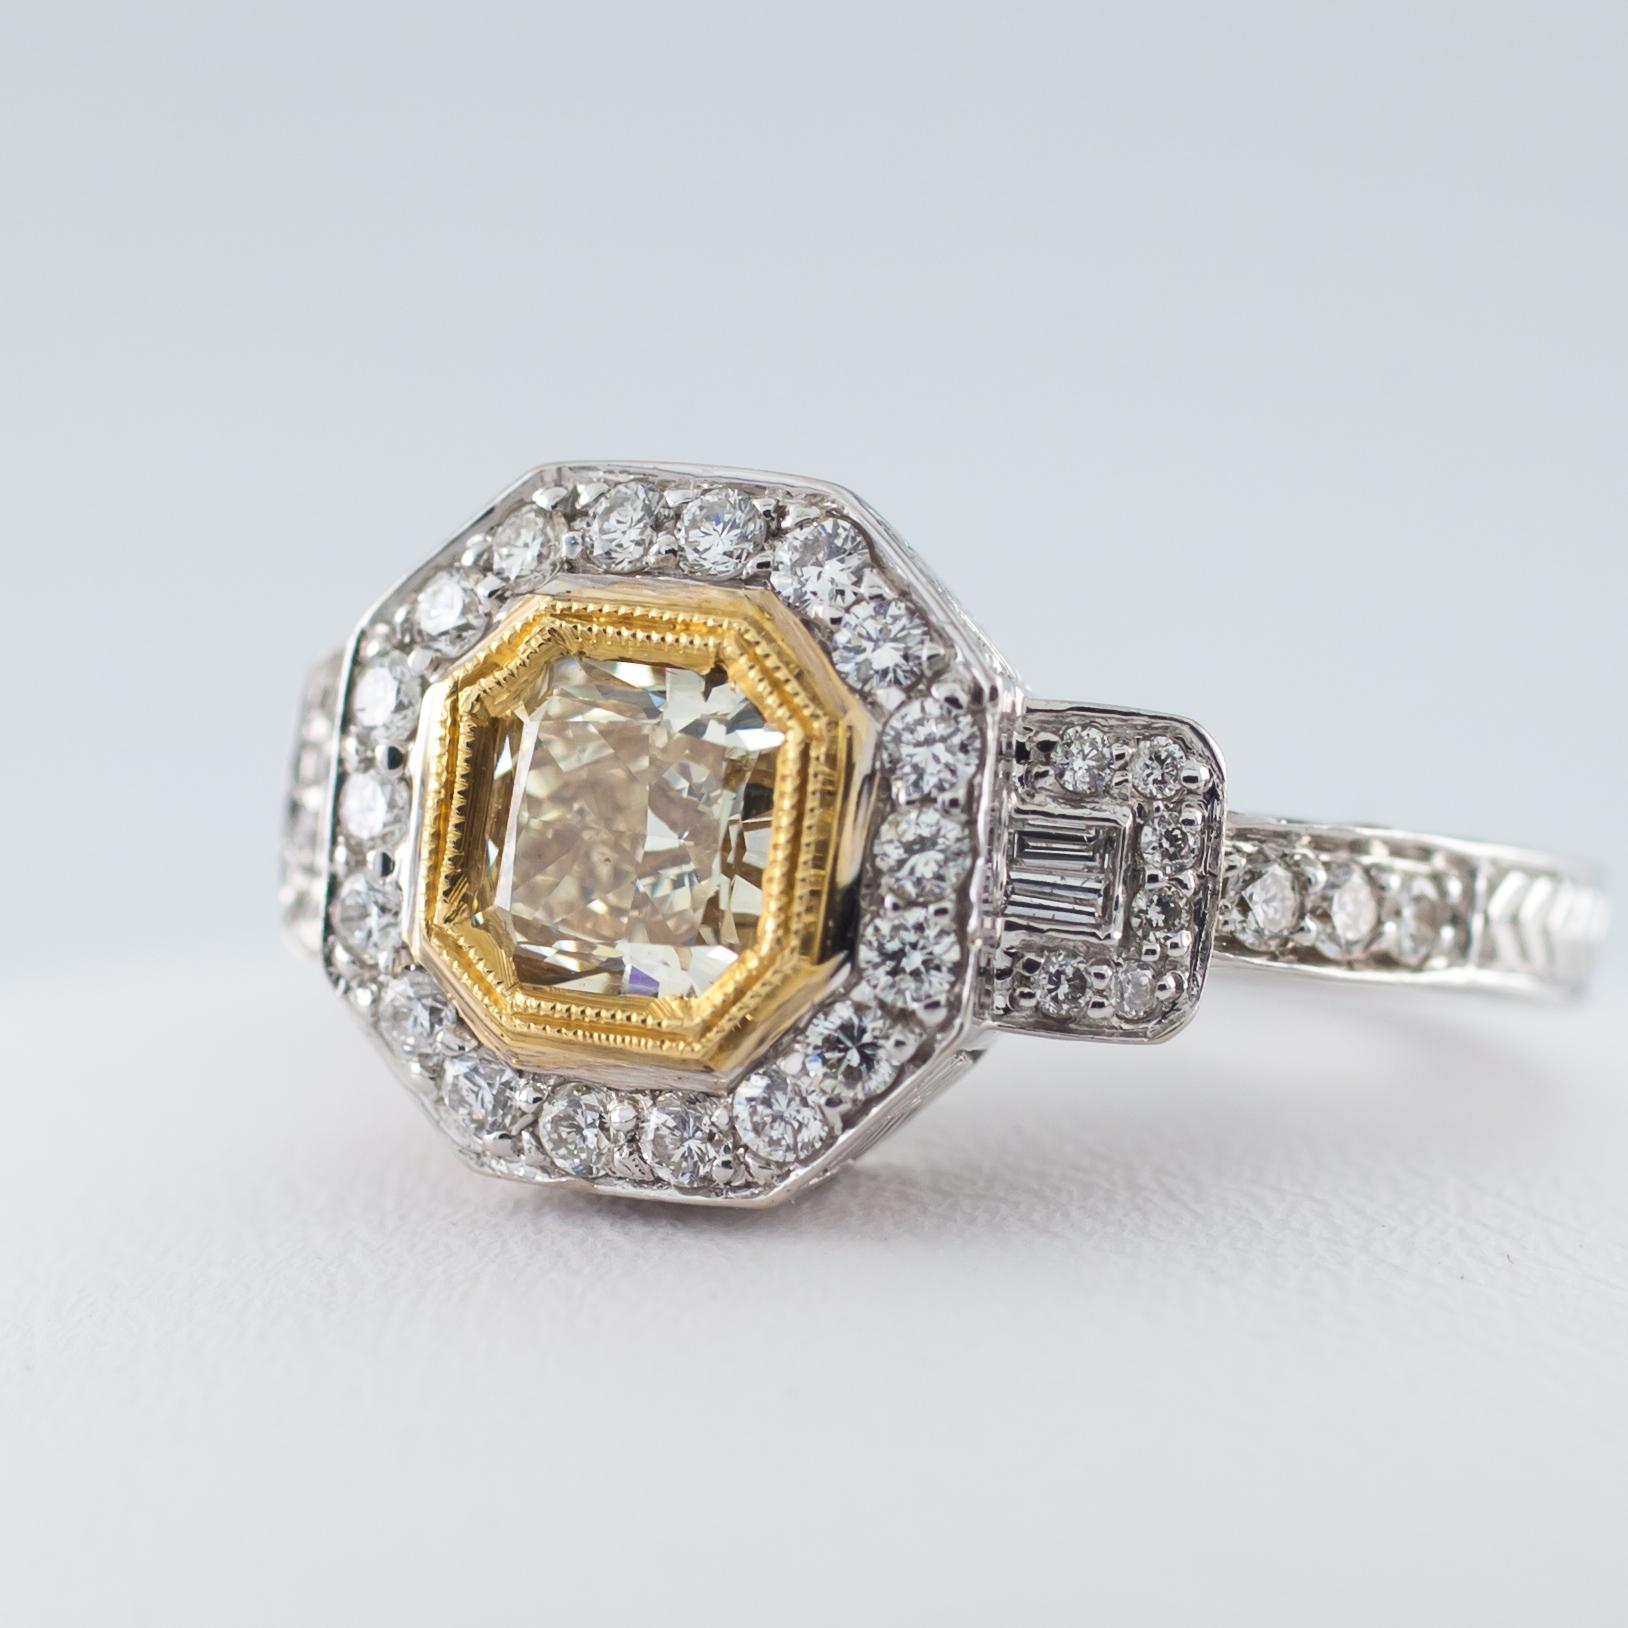 Radiant Cut Fancy Yellow Radiant Diamond Solitaire 18 Karat Two-Tone Gold Ring